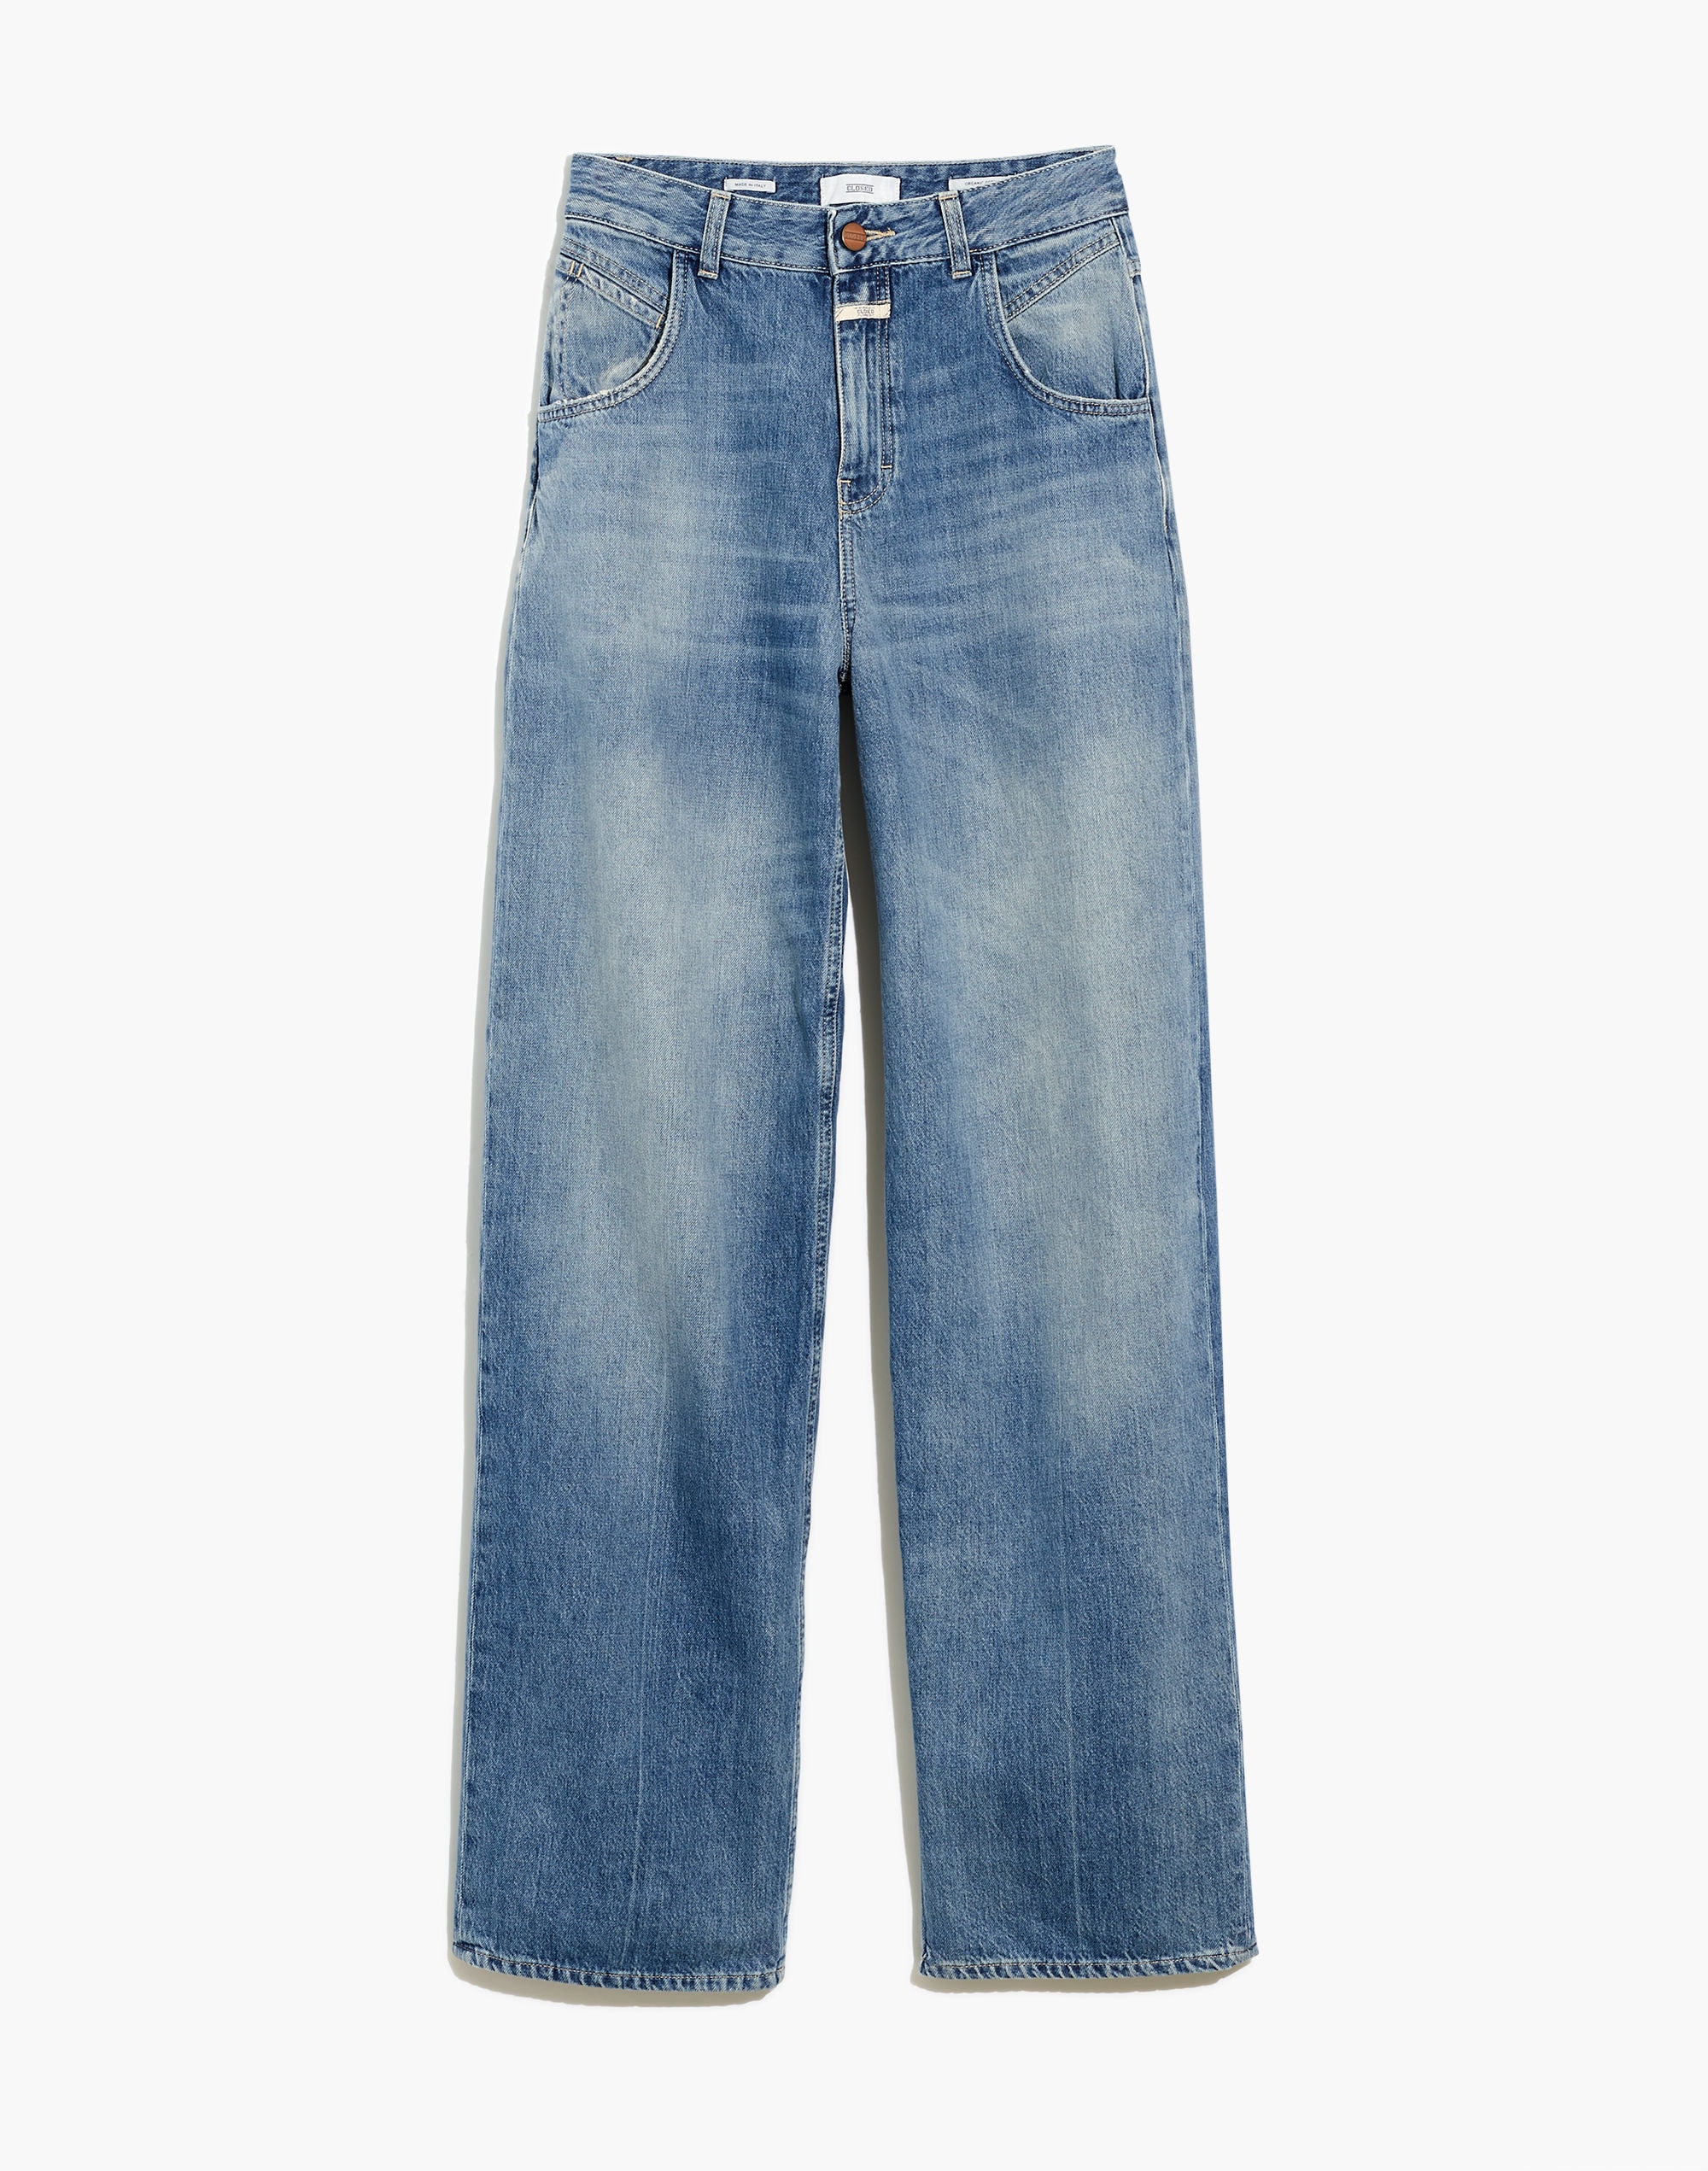 Closed® Edison Jeans in Mid Blue Vintage Wash